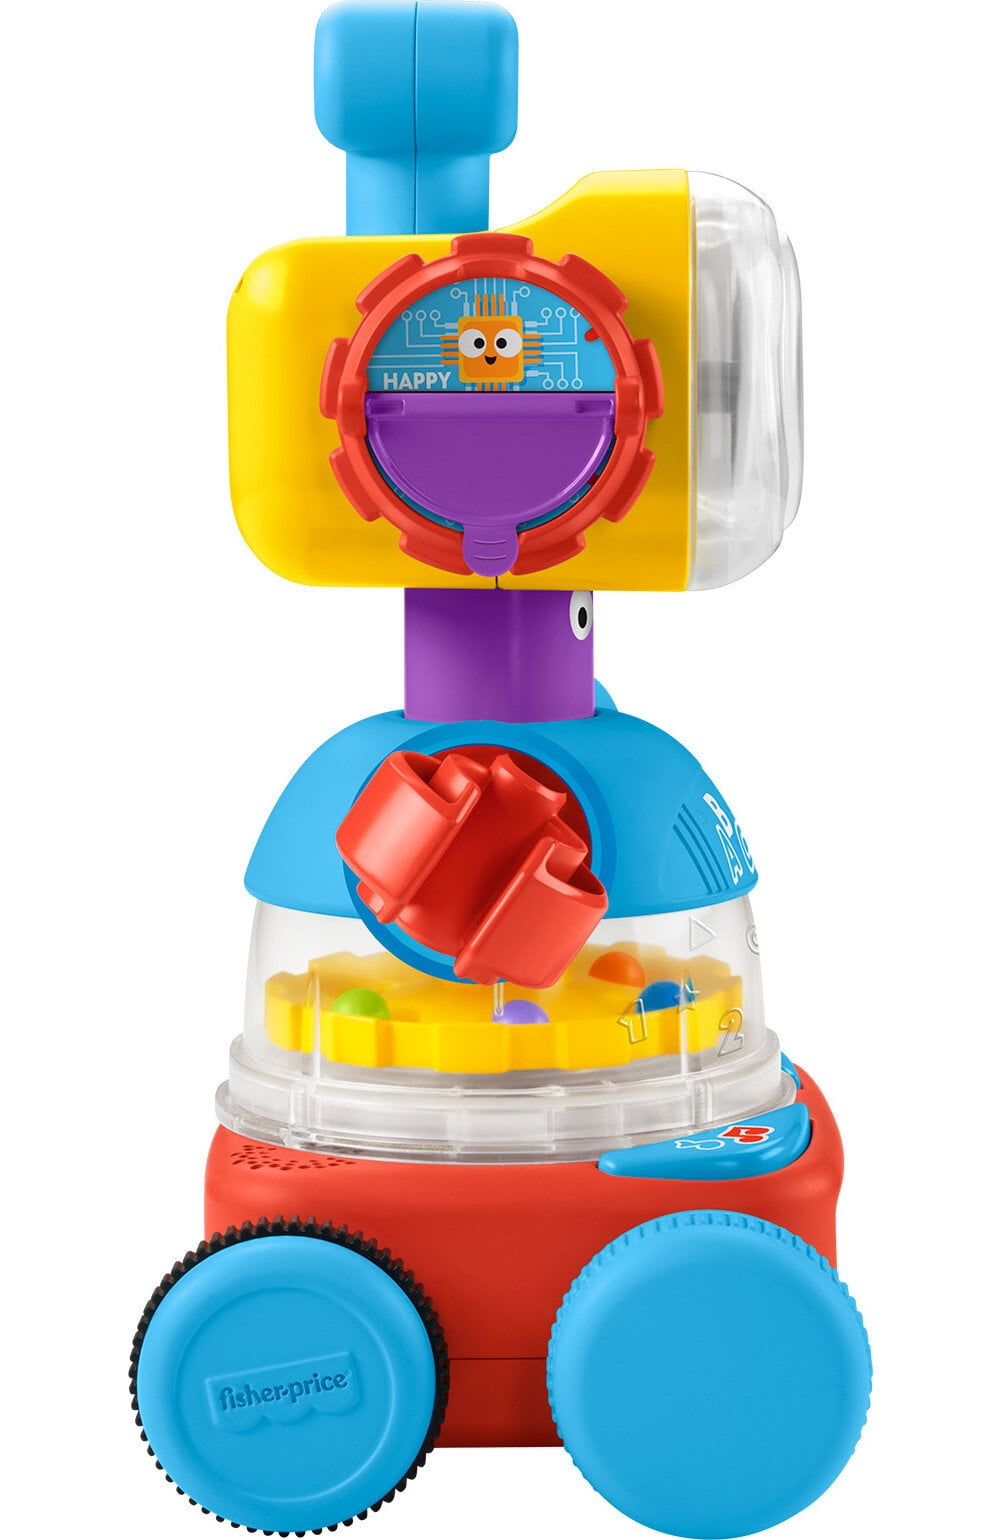 Fisher-Price Baby Toddler & Preschool Toy 4-In-1 Learning Bot With Music  Lights & Smart Stages Content For Ages 6+ Months